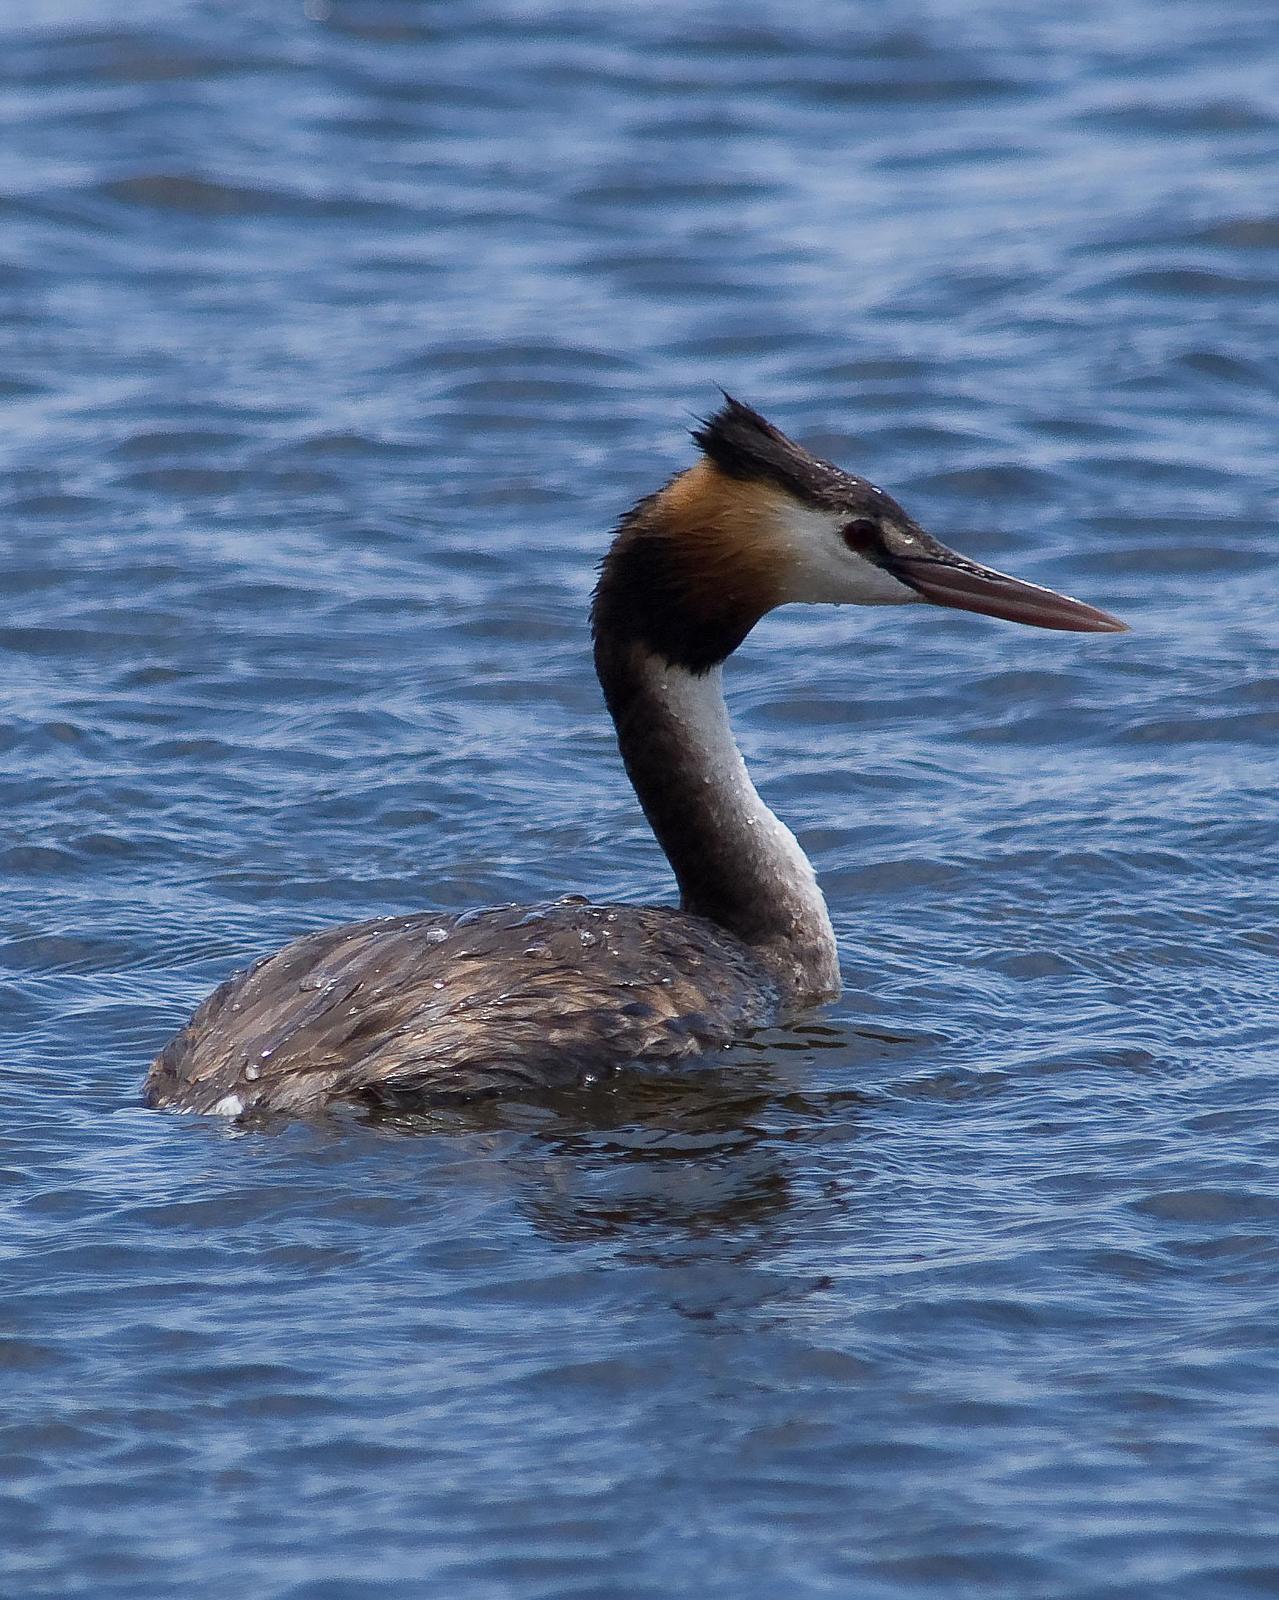 Great Crested Grebe Photo by Steve Percival